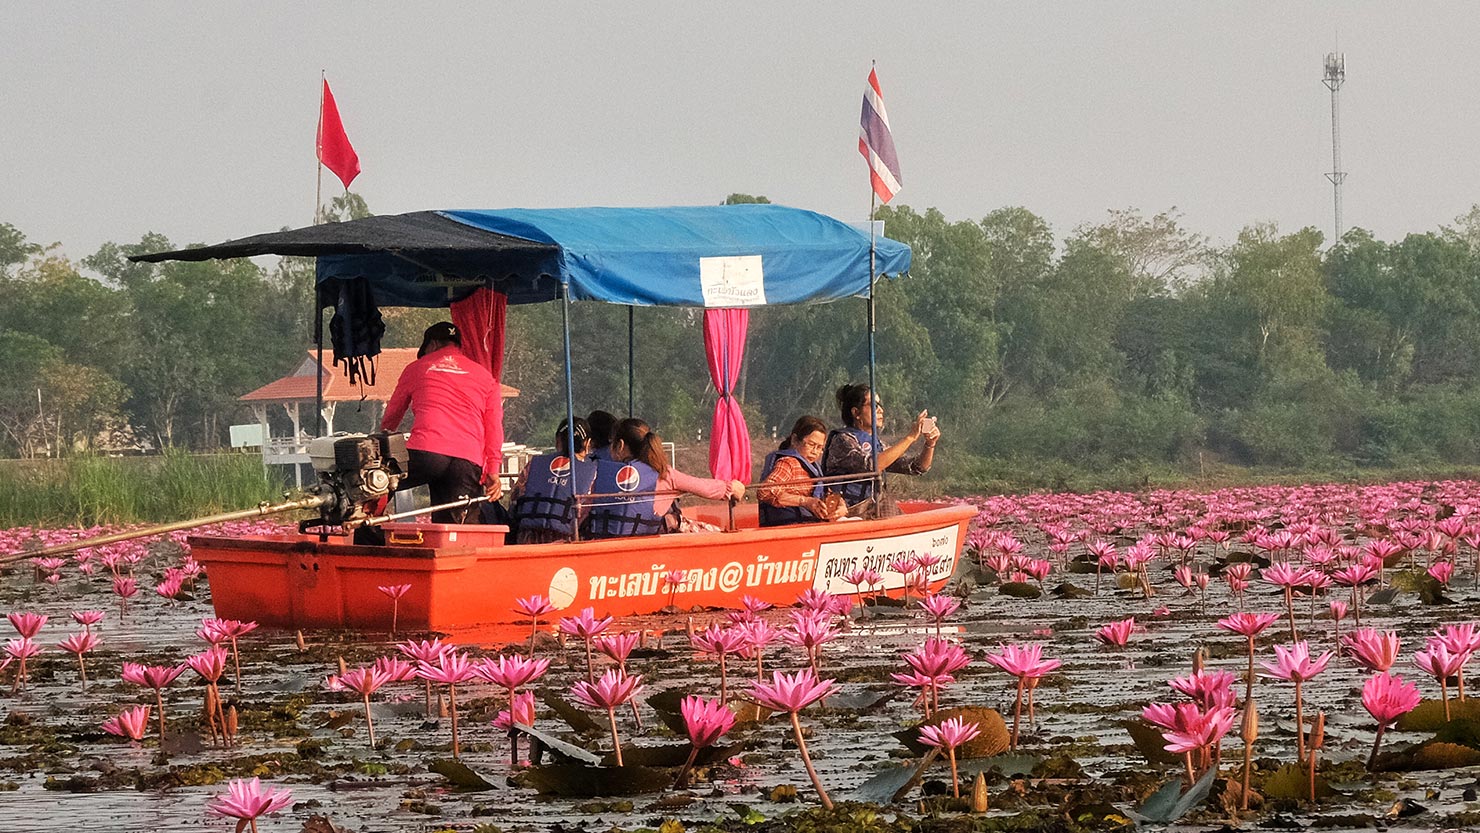 Tour boat drifts through the lilies that carpet Talay Bua Daeng (Red Lotus Lake) in Udon Thani Thailand